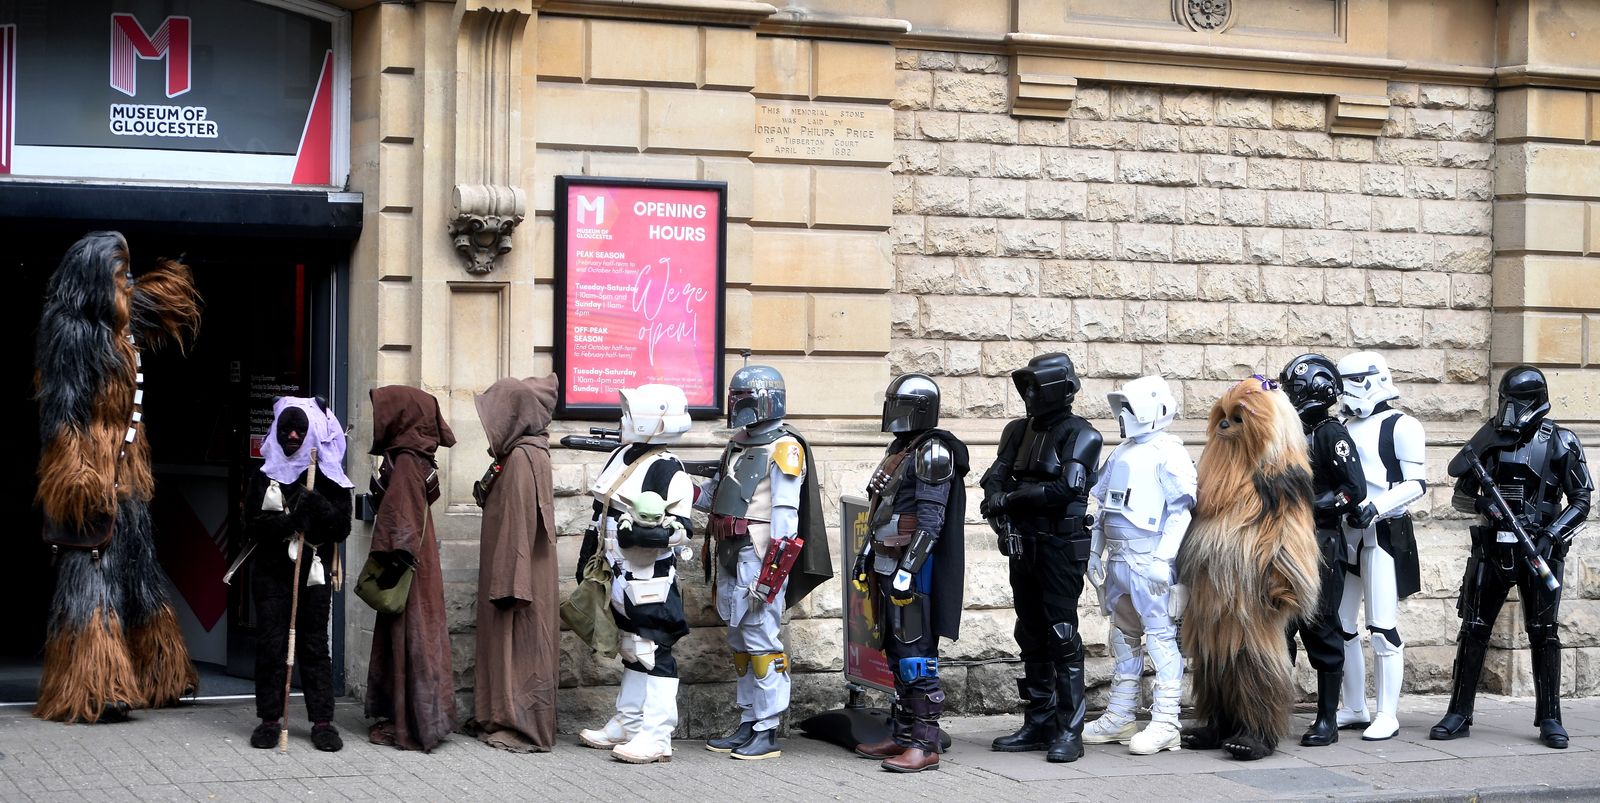 MAY THE TOYS BE WITH YOU MUSEUM OF GLOUCESTER PAUL NICHOLLS